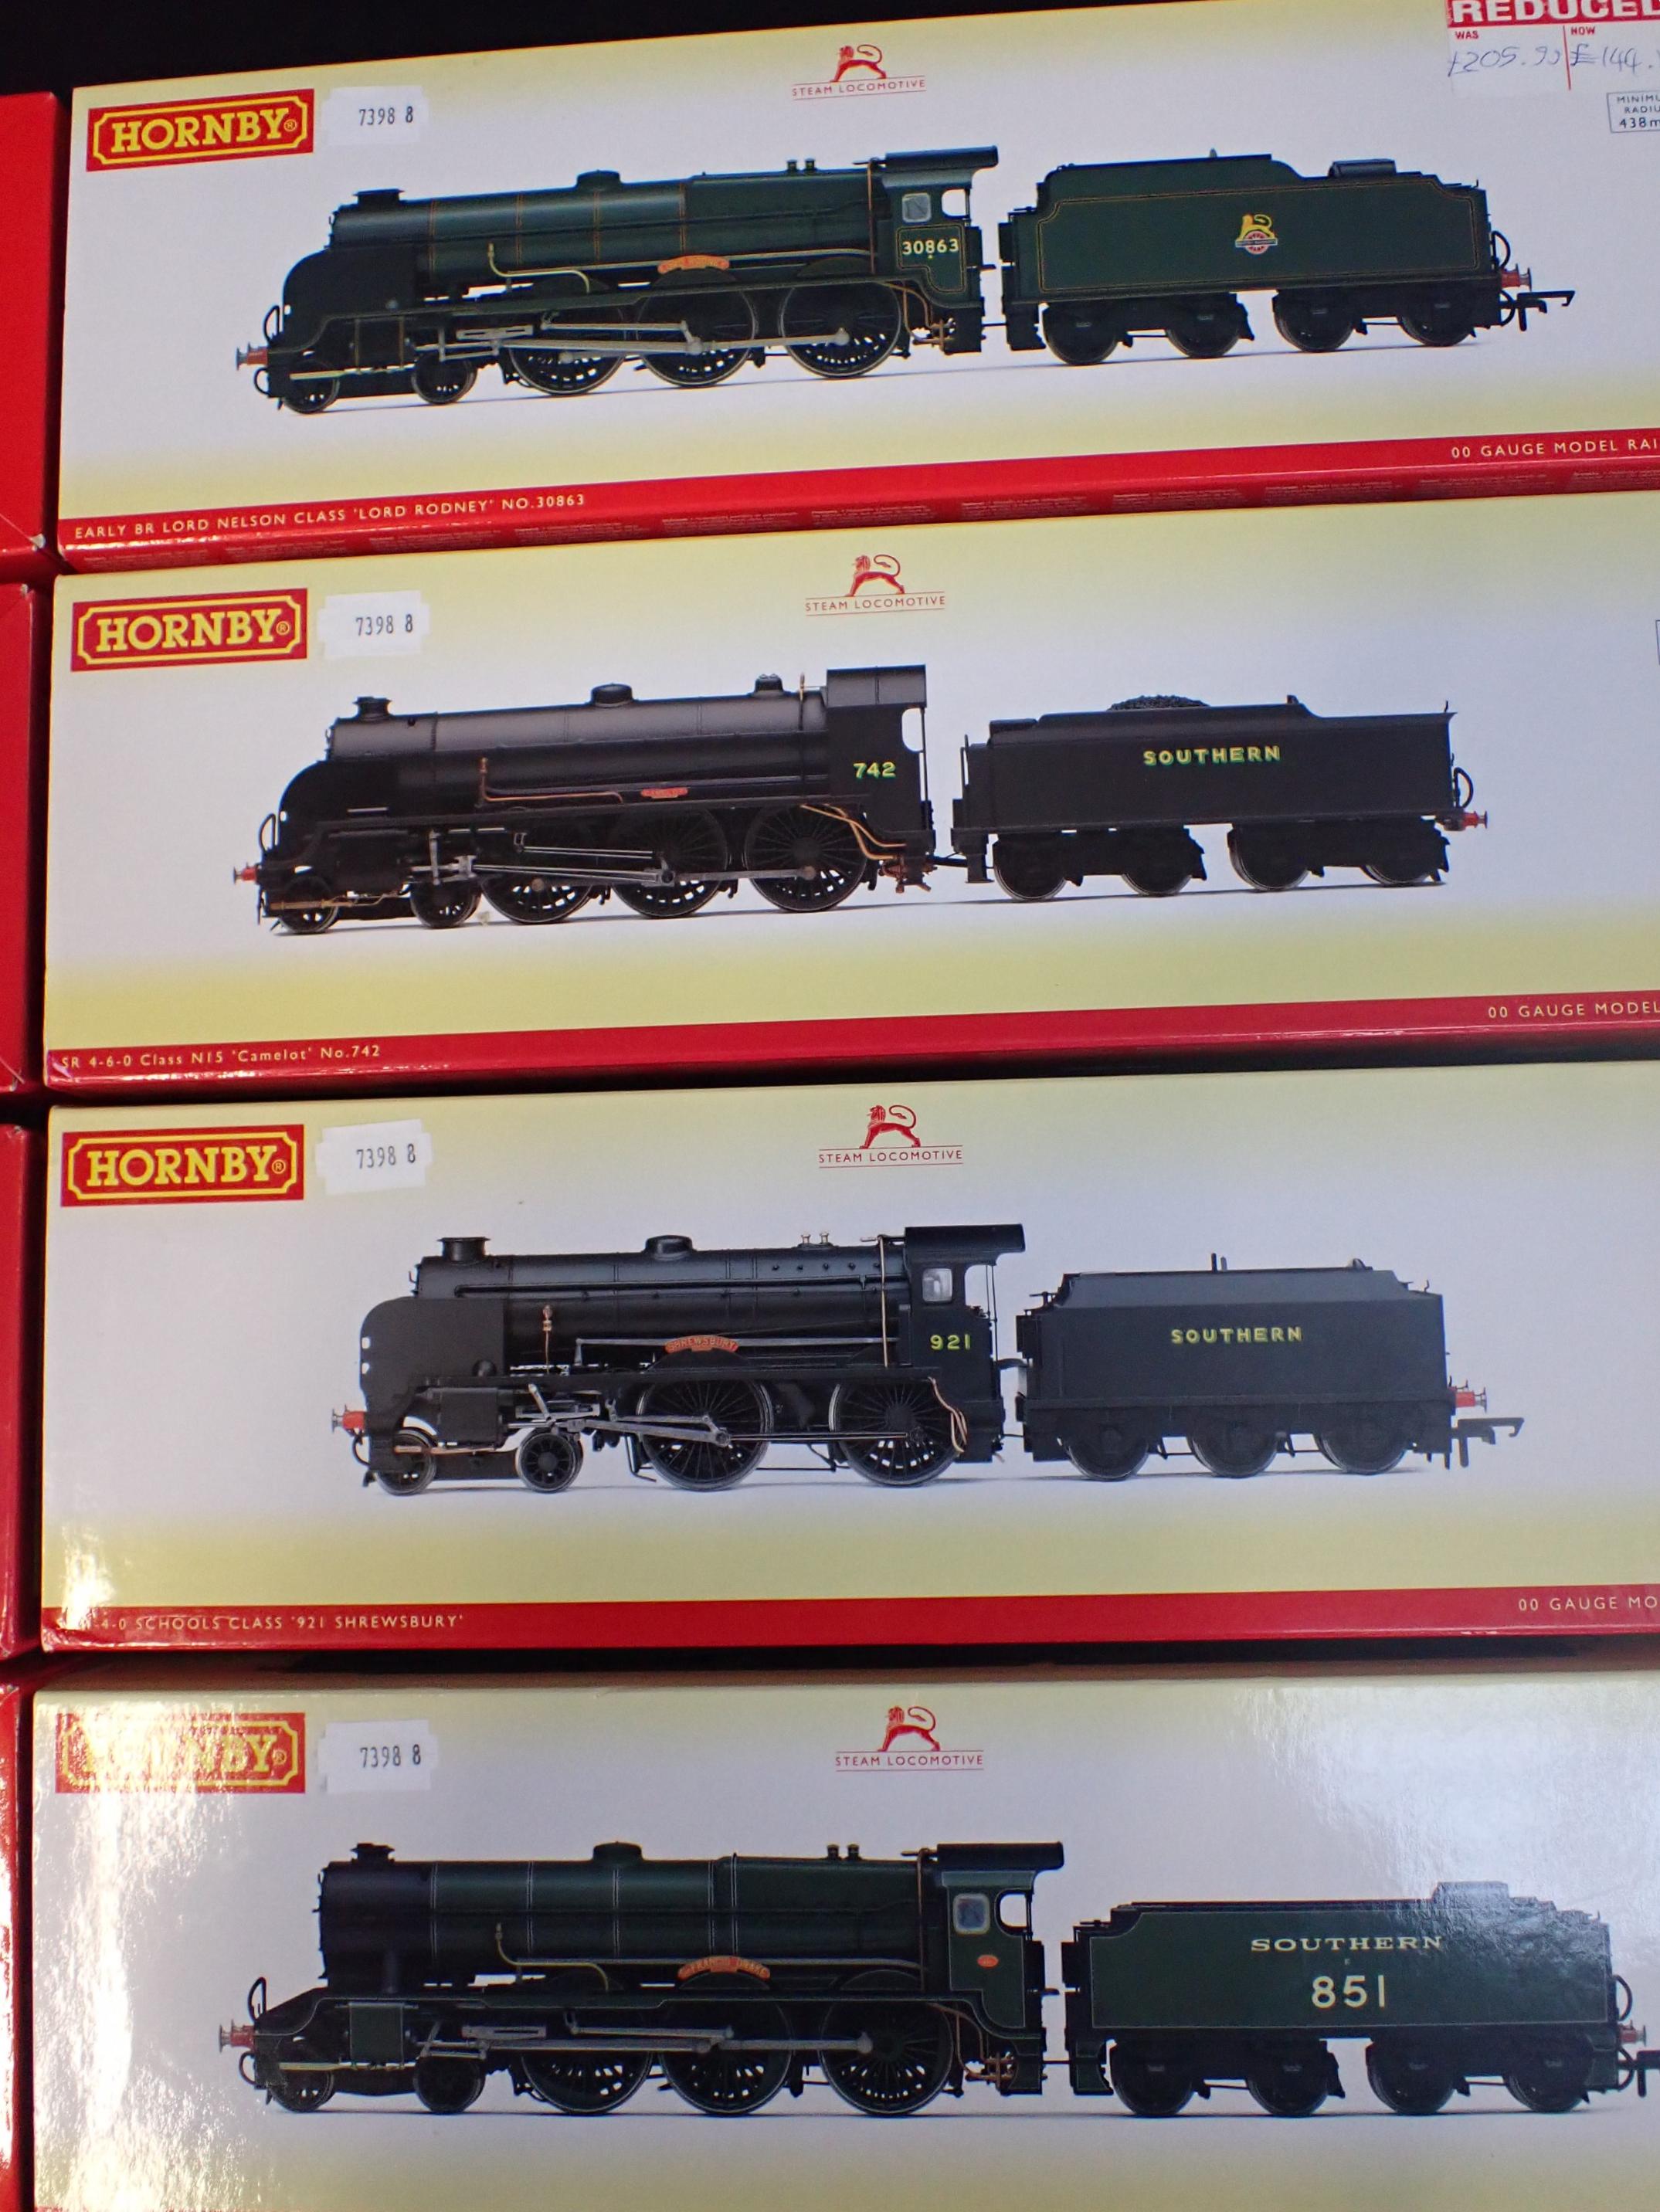 HORNBY 00 GAUGE SOUTHERN RAILWAY LOCOMOTIVES BOXED AS NEW - Image 3 of 3